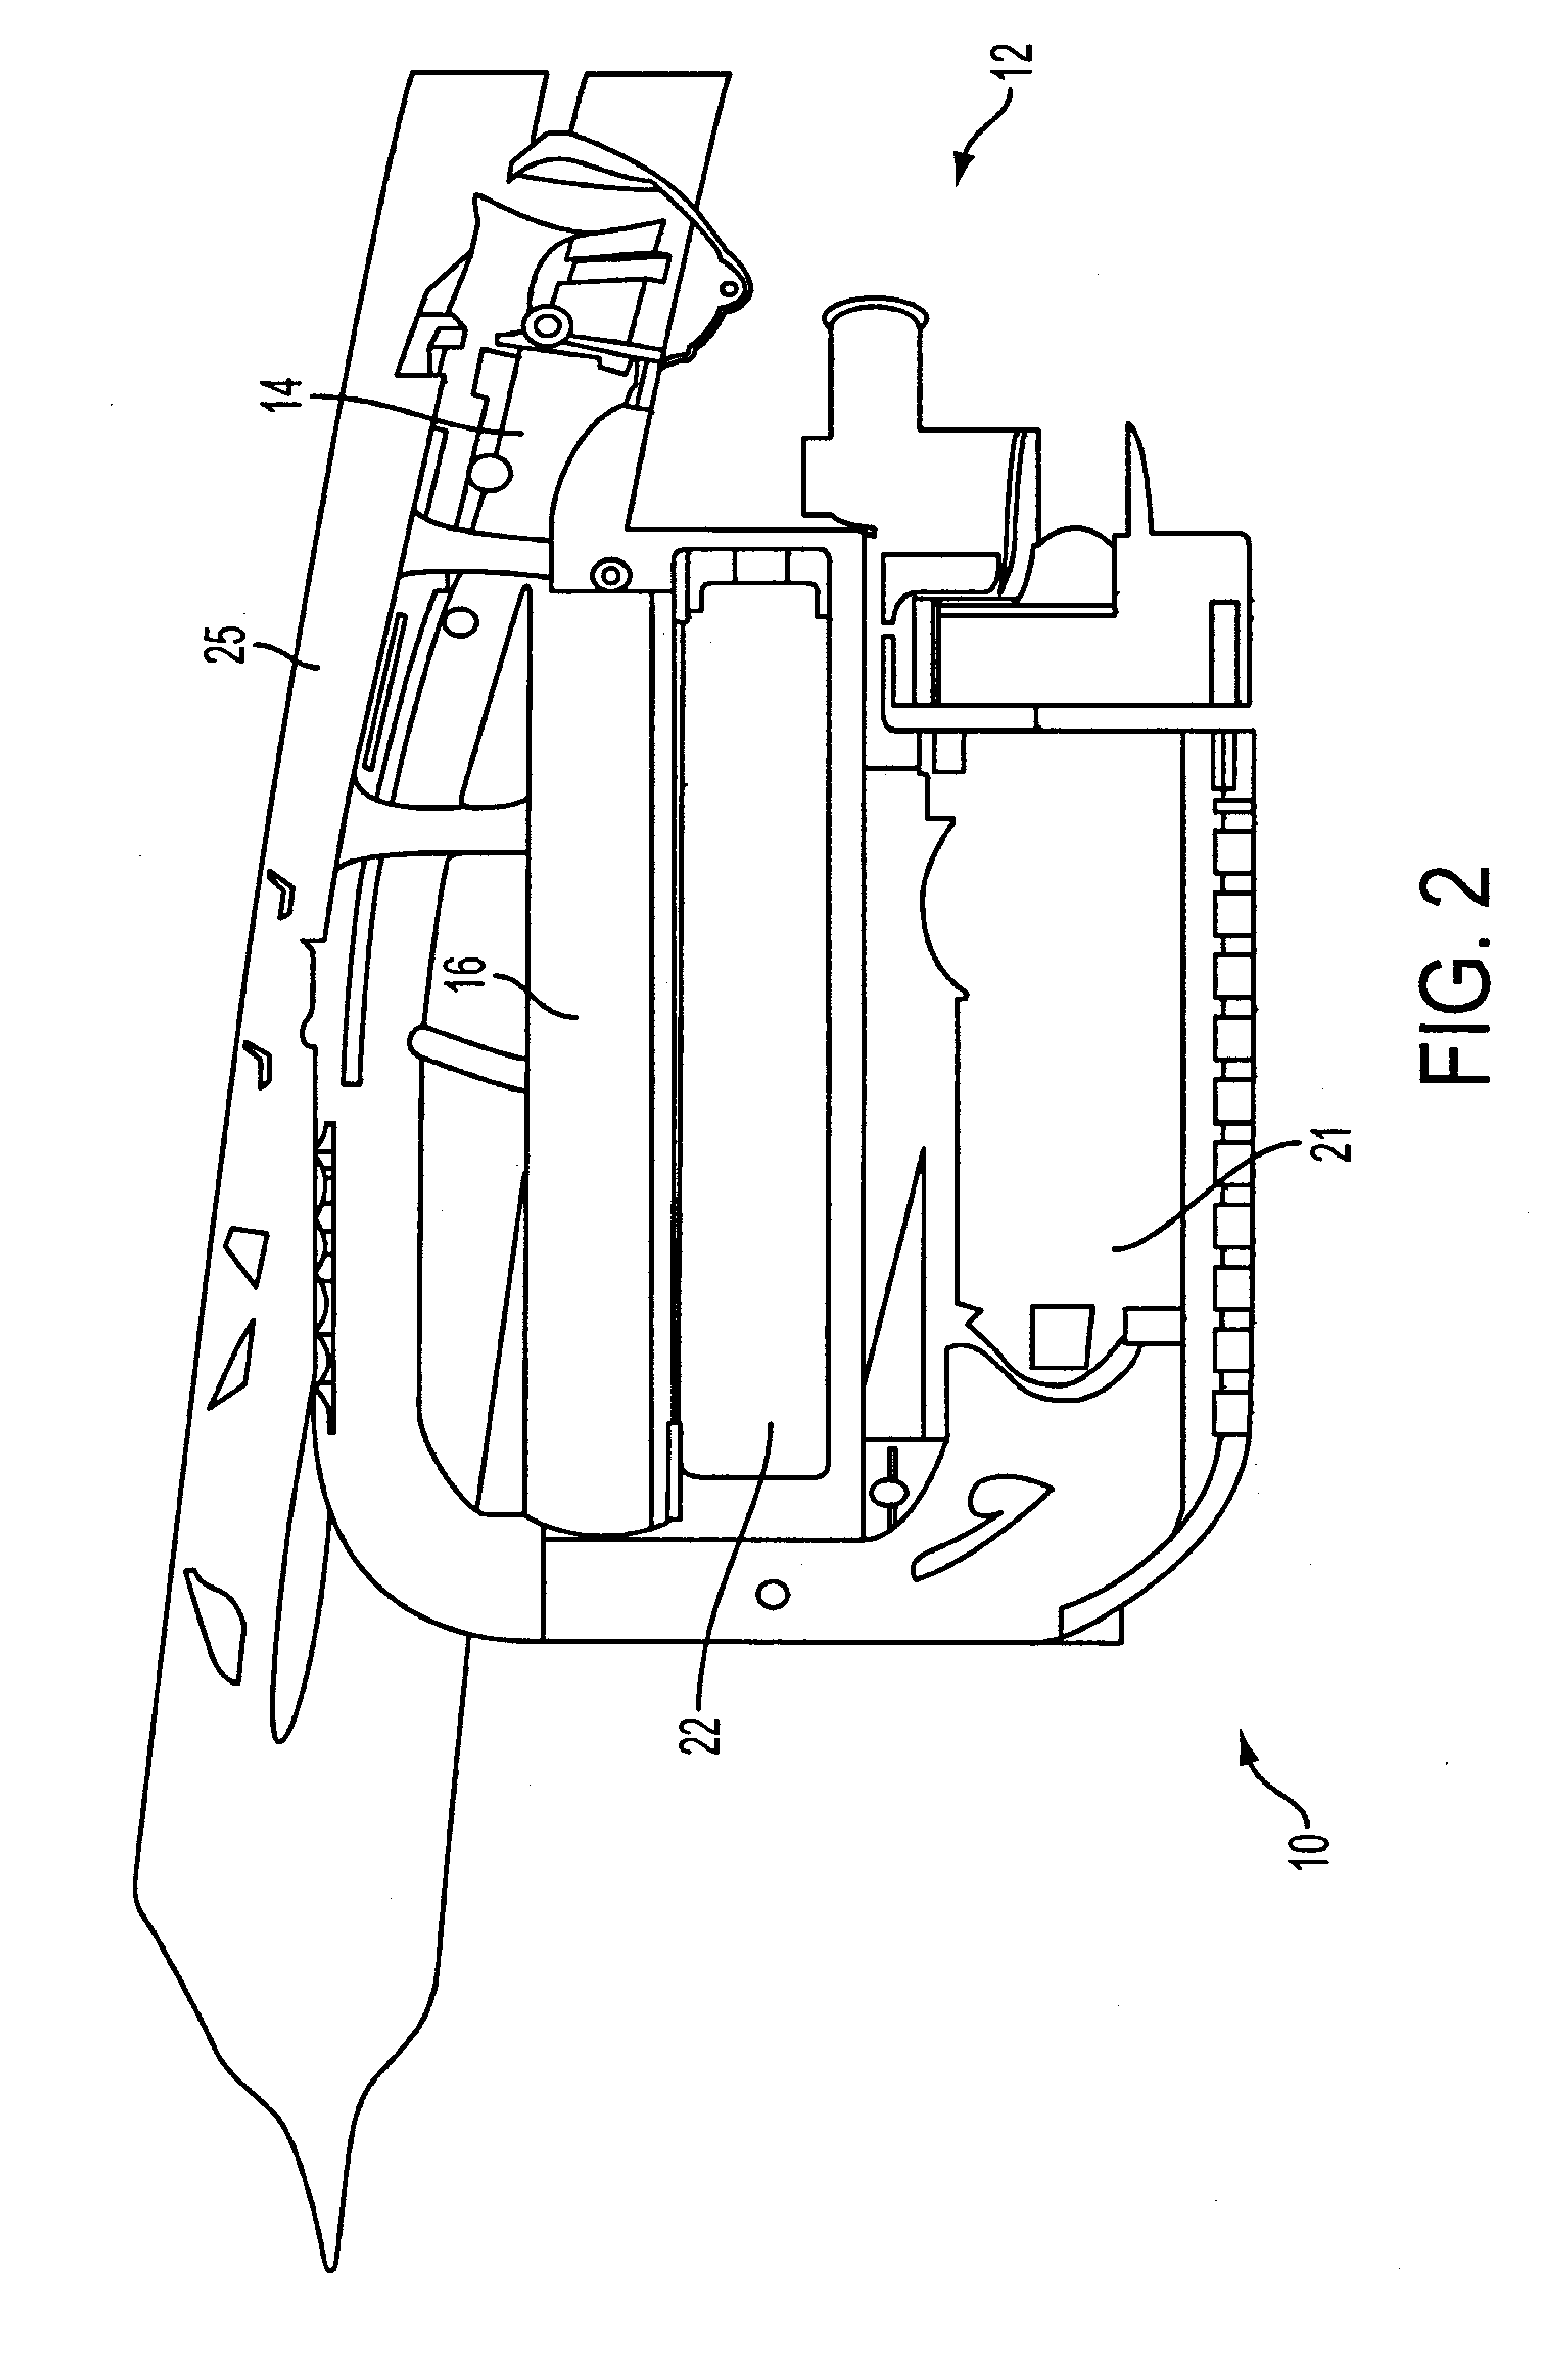 Apparatus and method for boosting engine performance